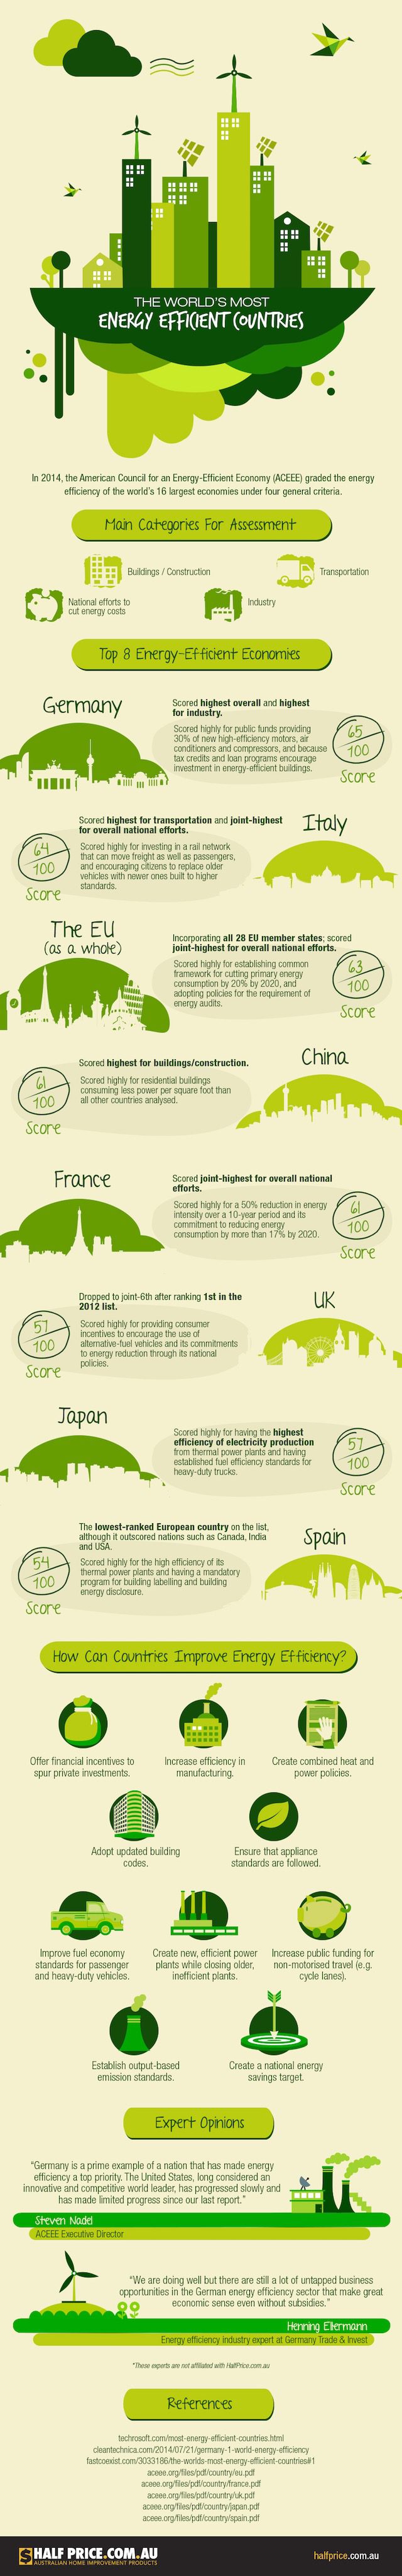 Infographic of the world's most energy efficient countries 